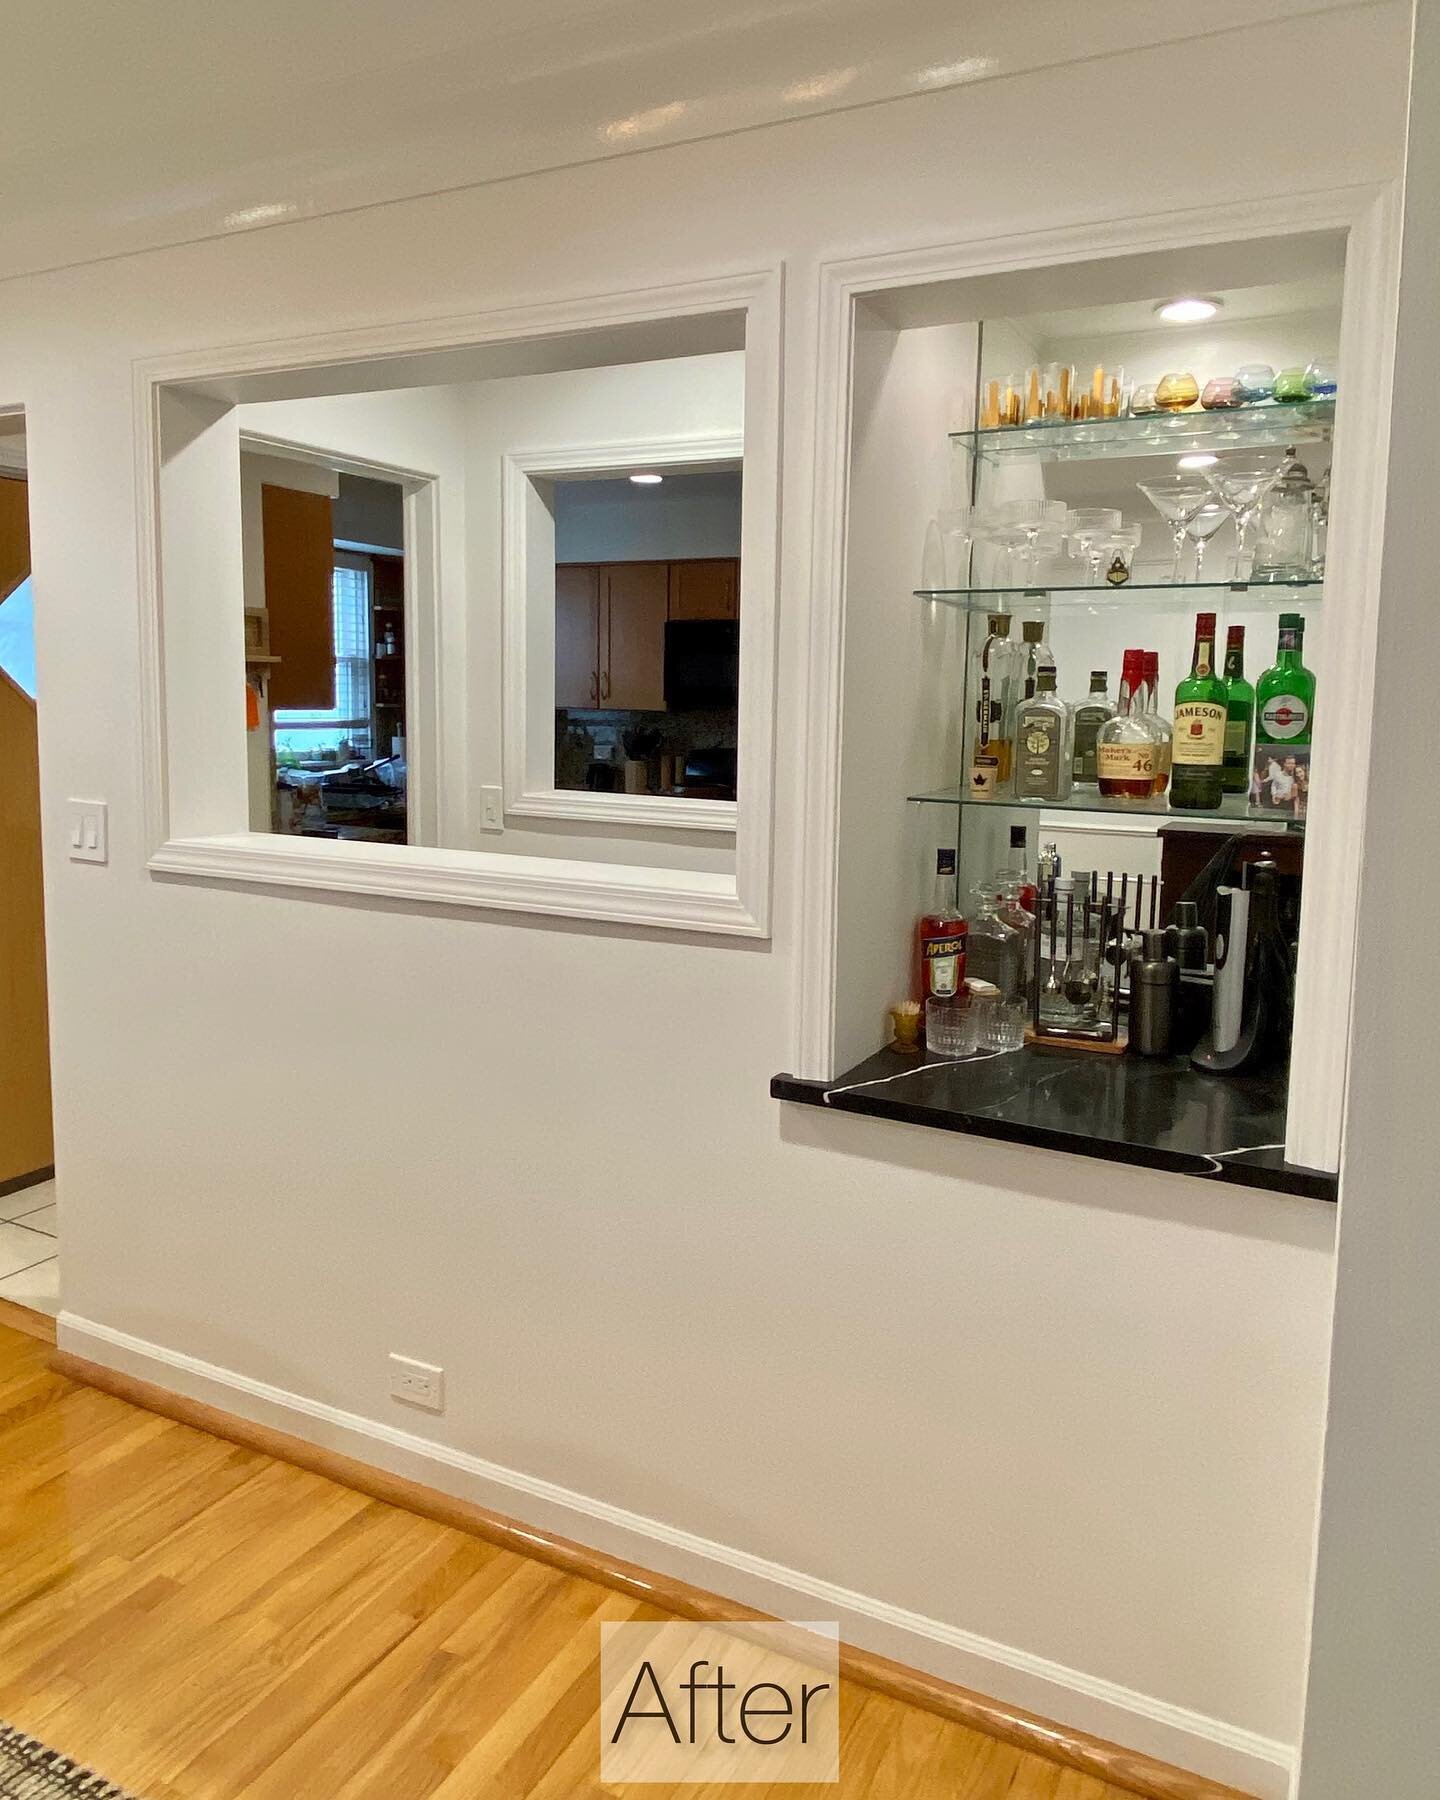 Bar nook &amp; wall openings: After -&gt; Before

Making the most of available space with a bar nook featuring recessed lighting, custom countertop &amp; glass shelves. 

Wall openings create a cohesive feel between rooms that were formerly closed of